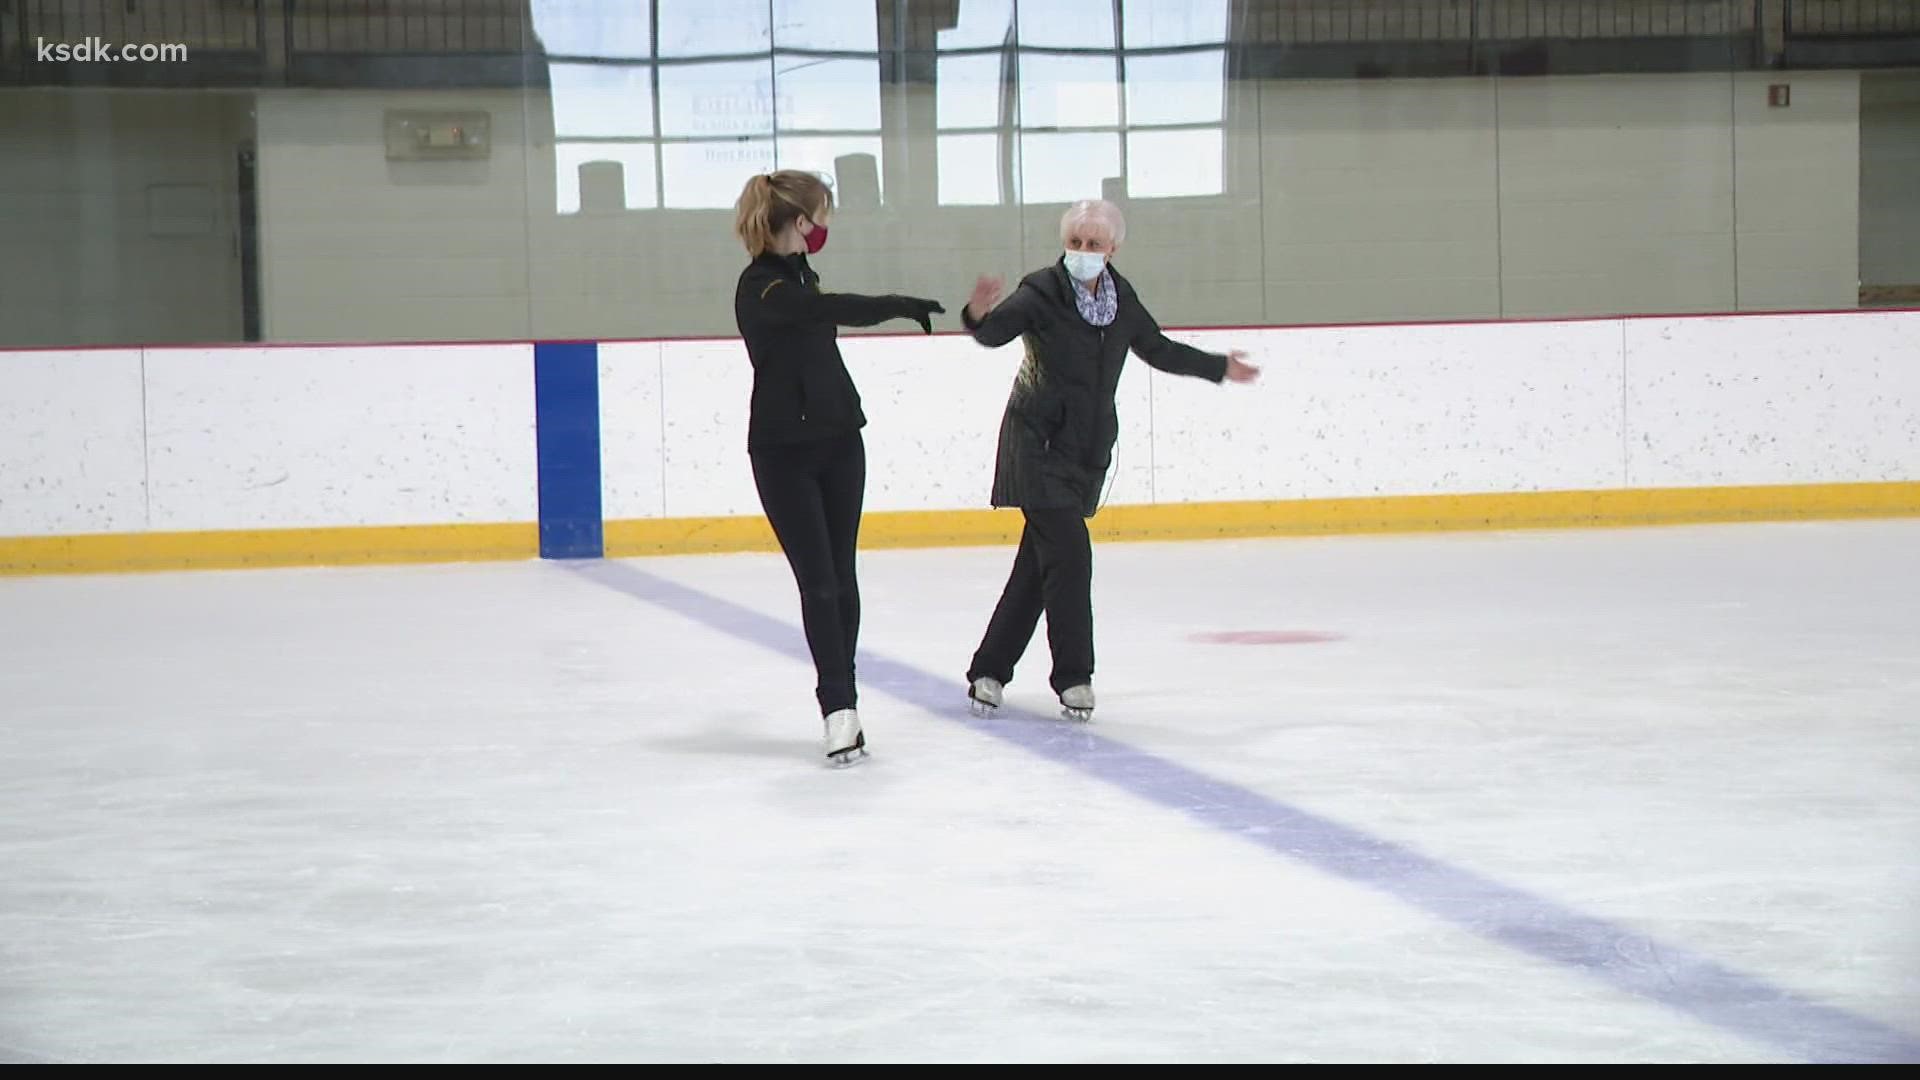 Figure skating is not an exact science. That's why coach Ramona Peterson is a stickler for her skaters doing it the right way.